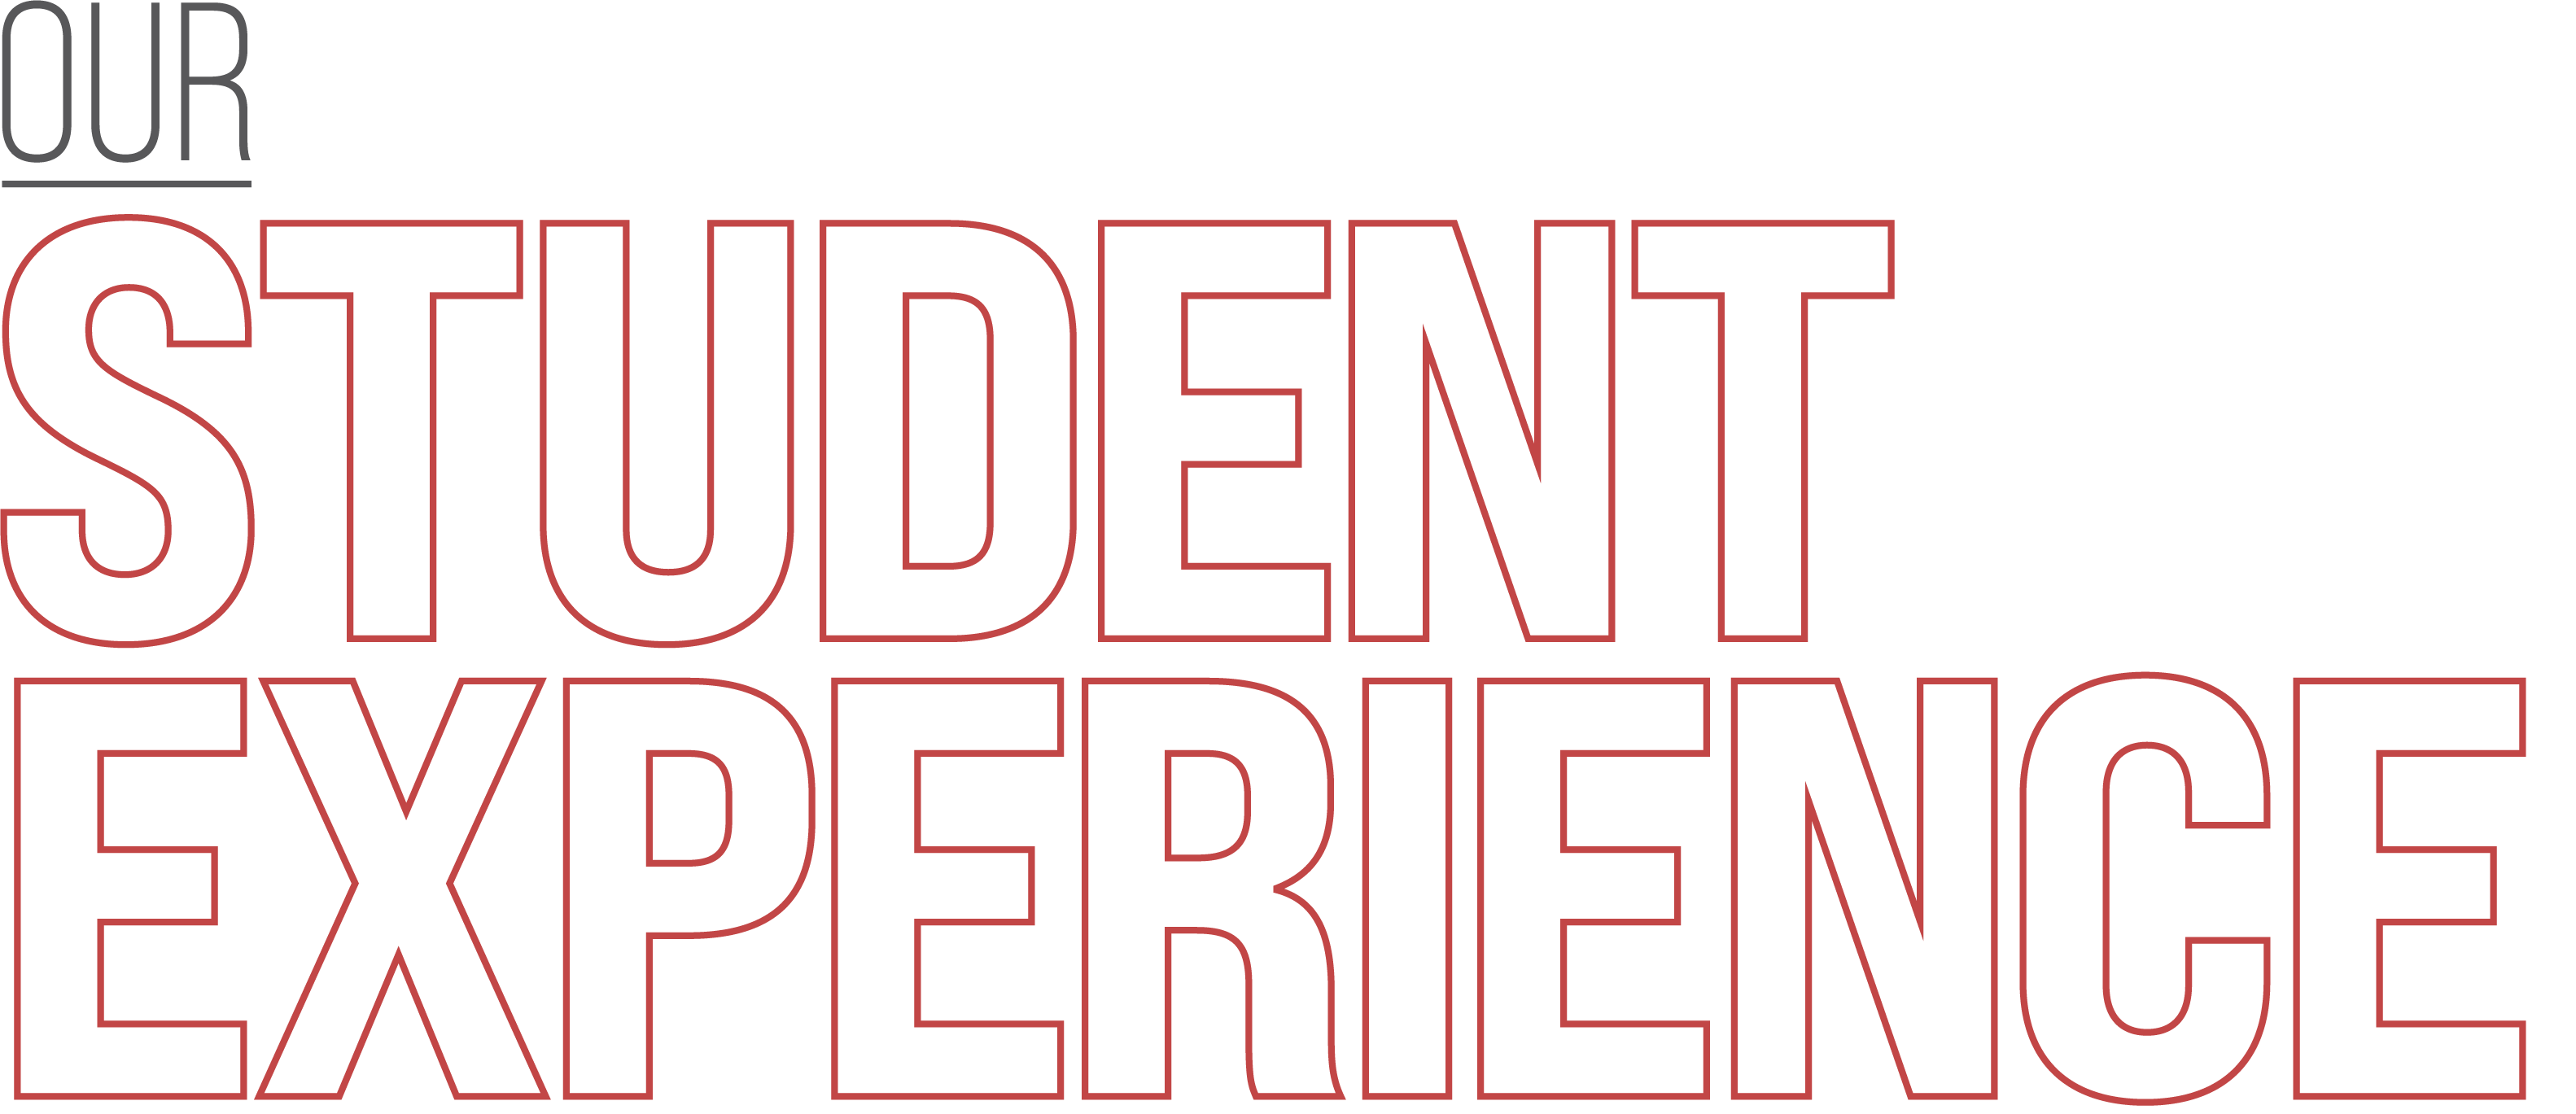 Text that reads: "Our Student Experience"